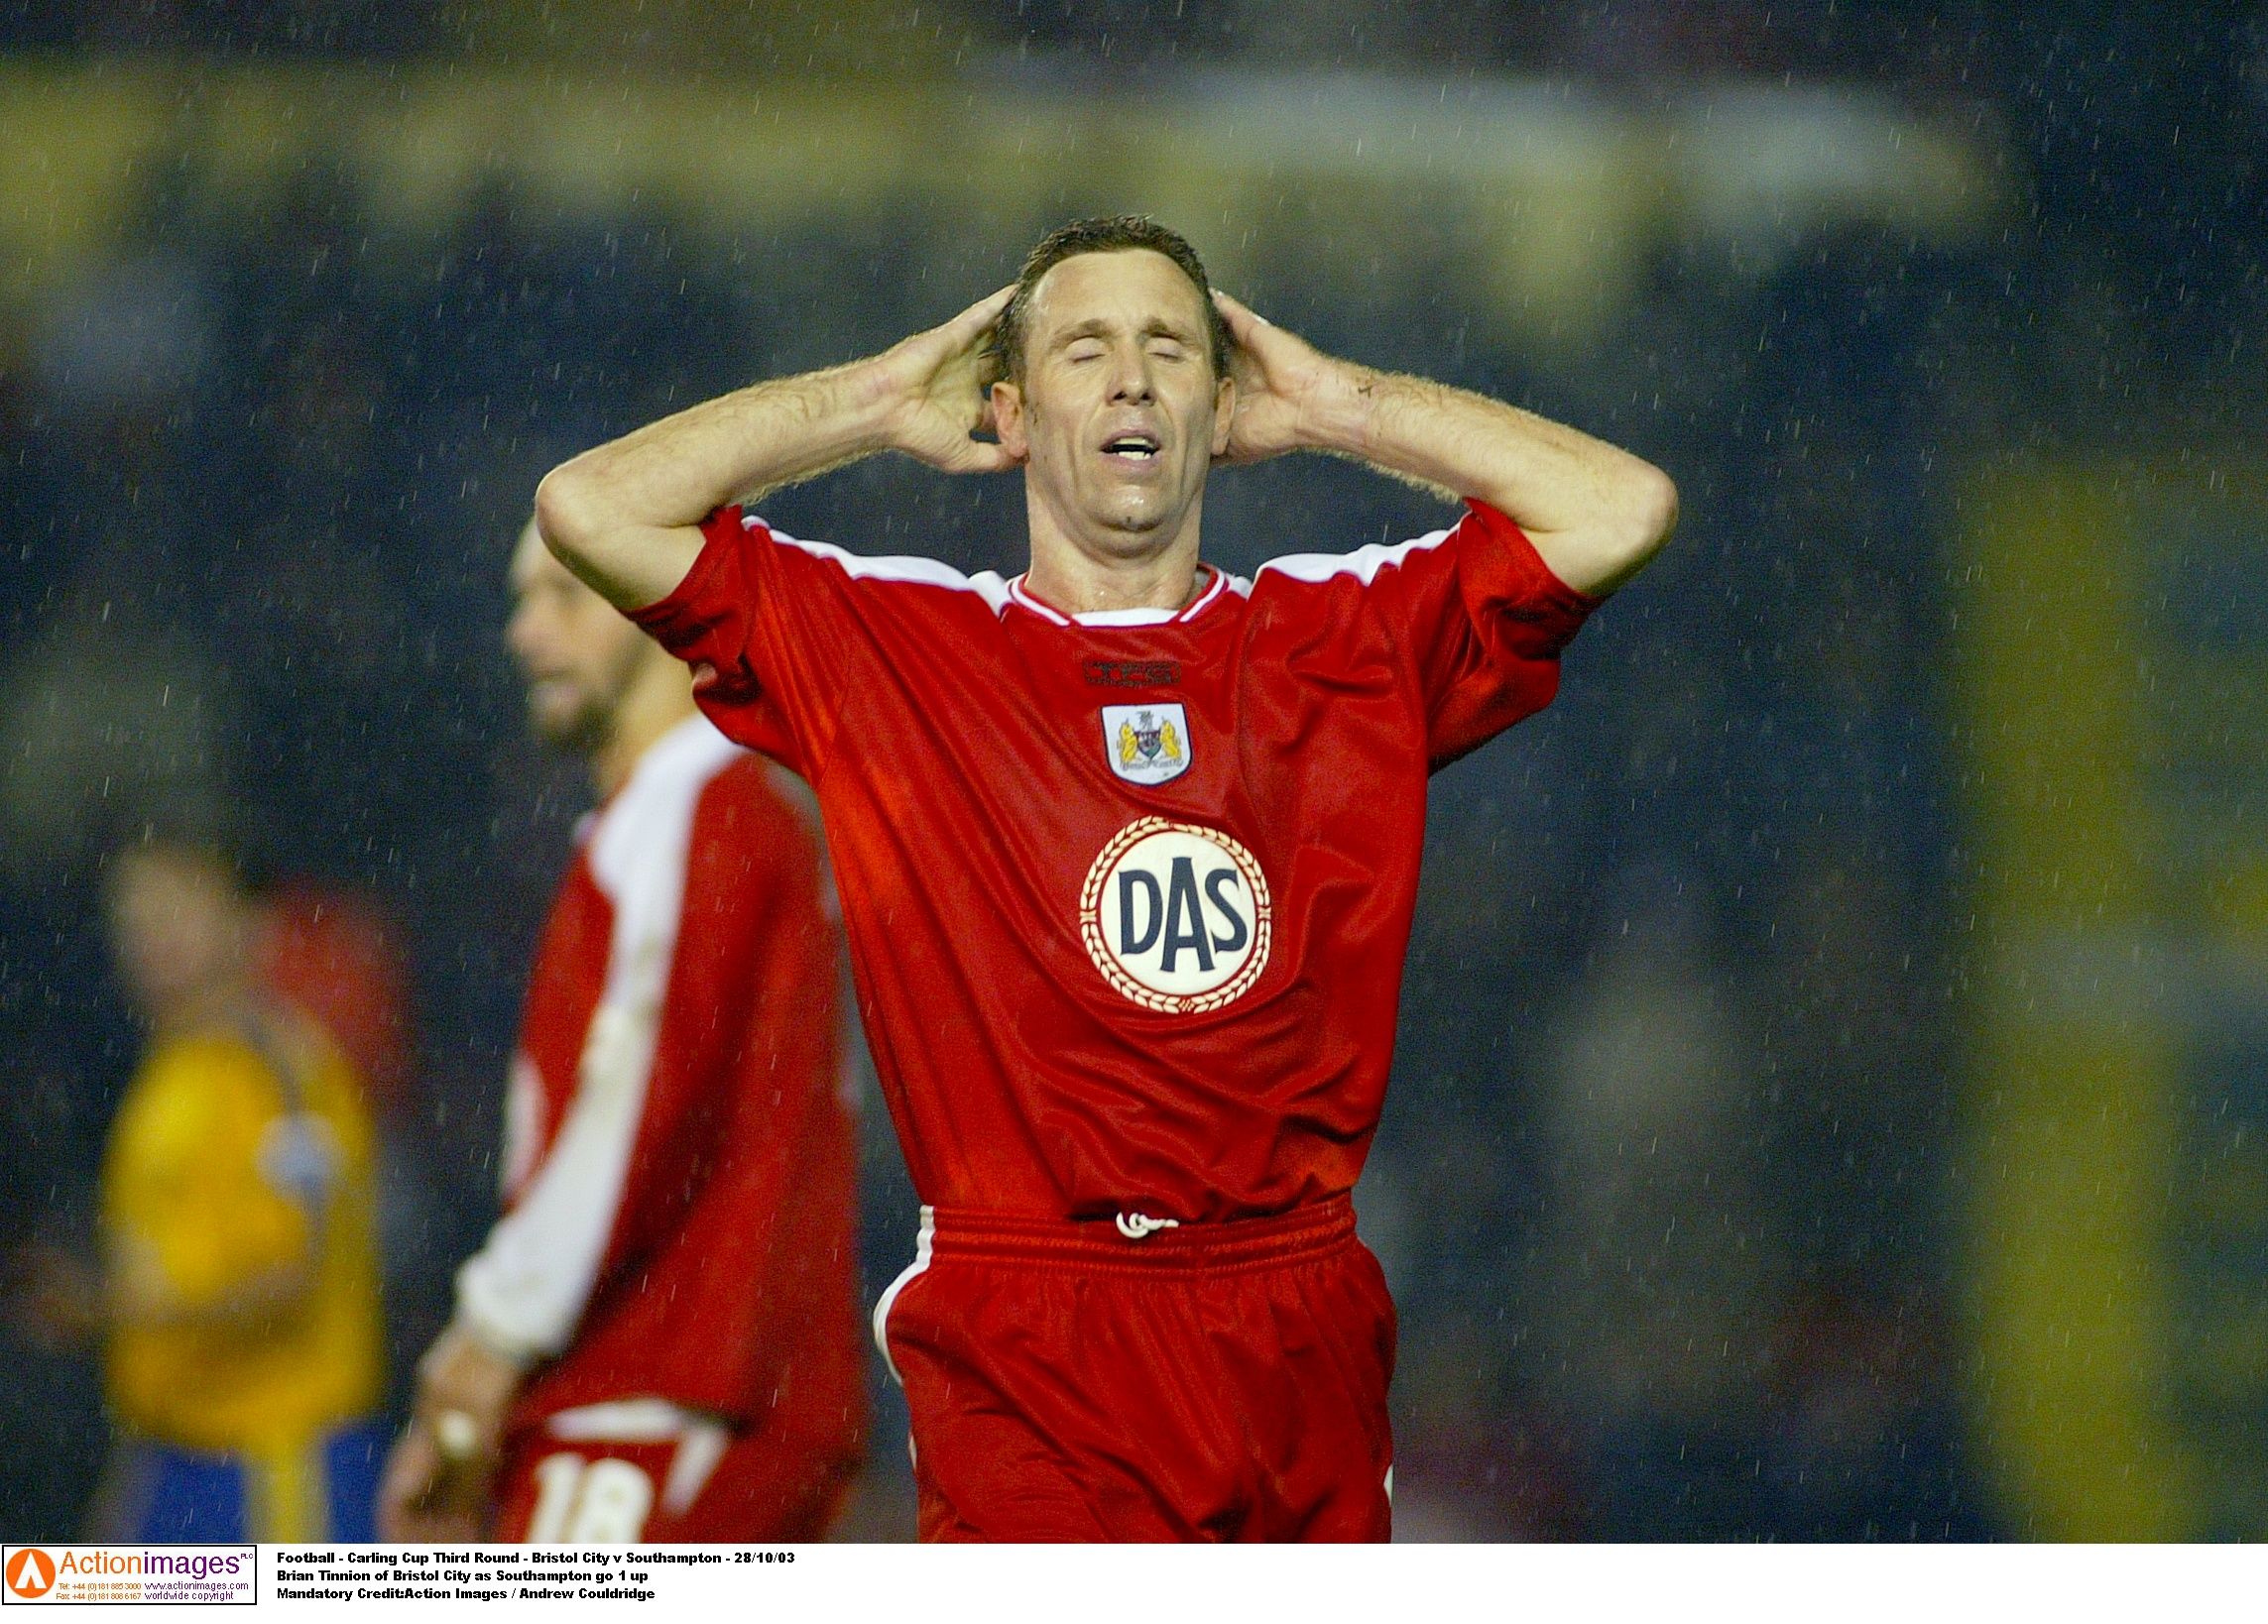 Football - Carling Cup Third Round - Bristol City v Southampton - 28/10/03 
Brian Tinnion of Bristol City as Southampton go 1 up 
Mandatory Credit:Action Images / Andrew Couldridge